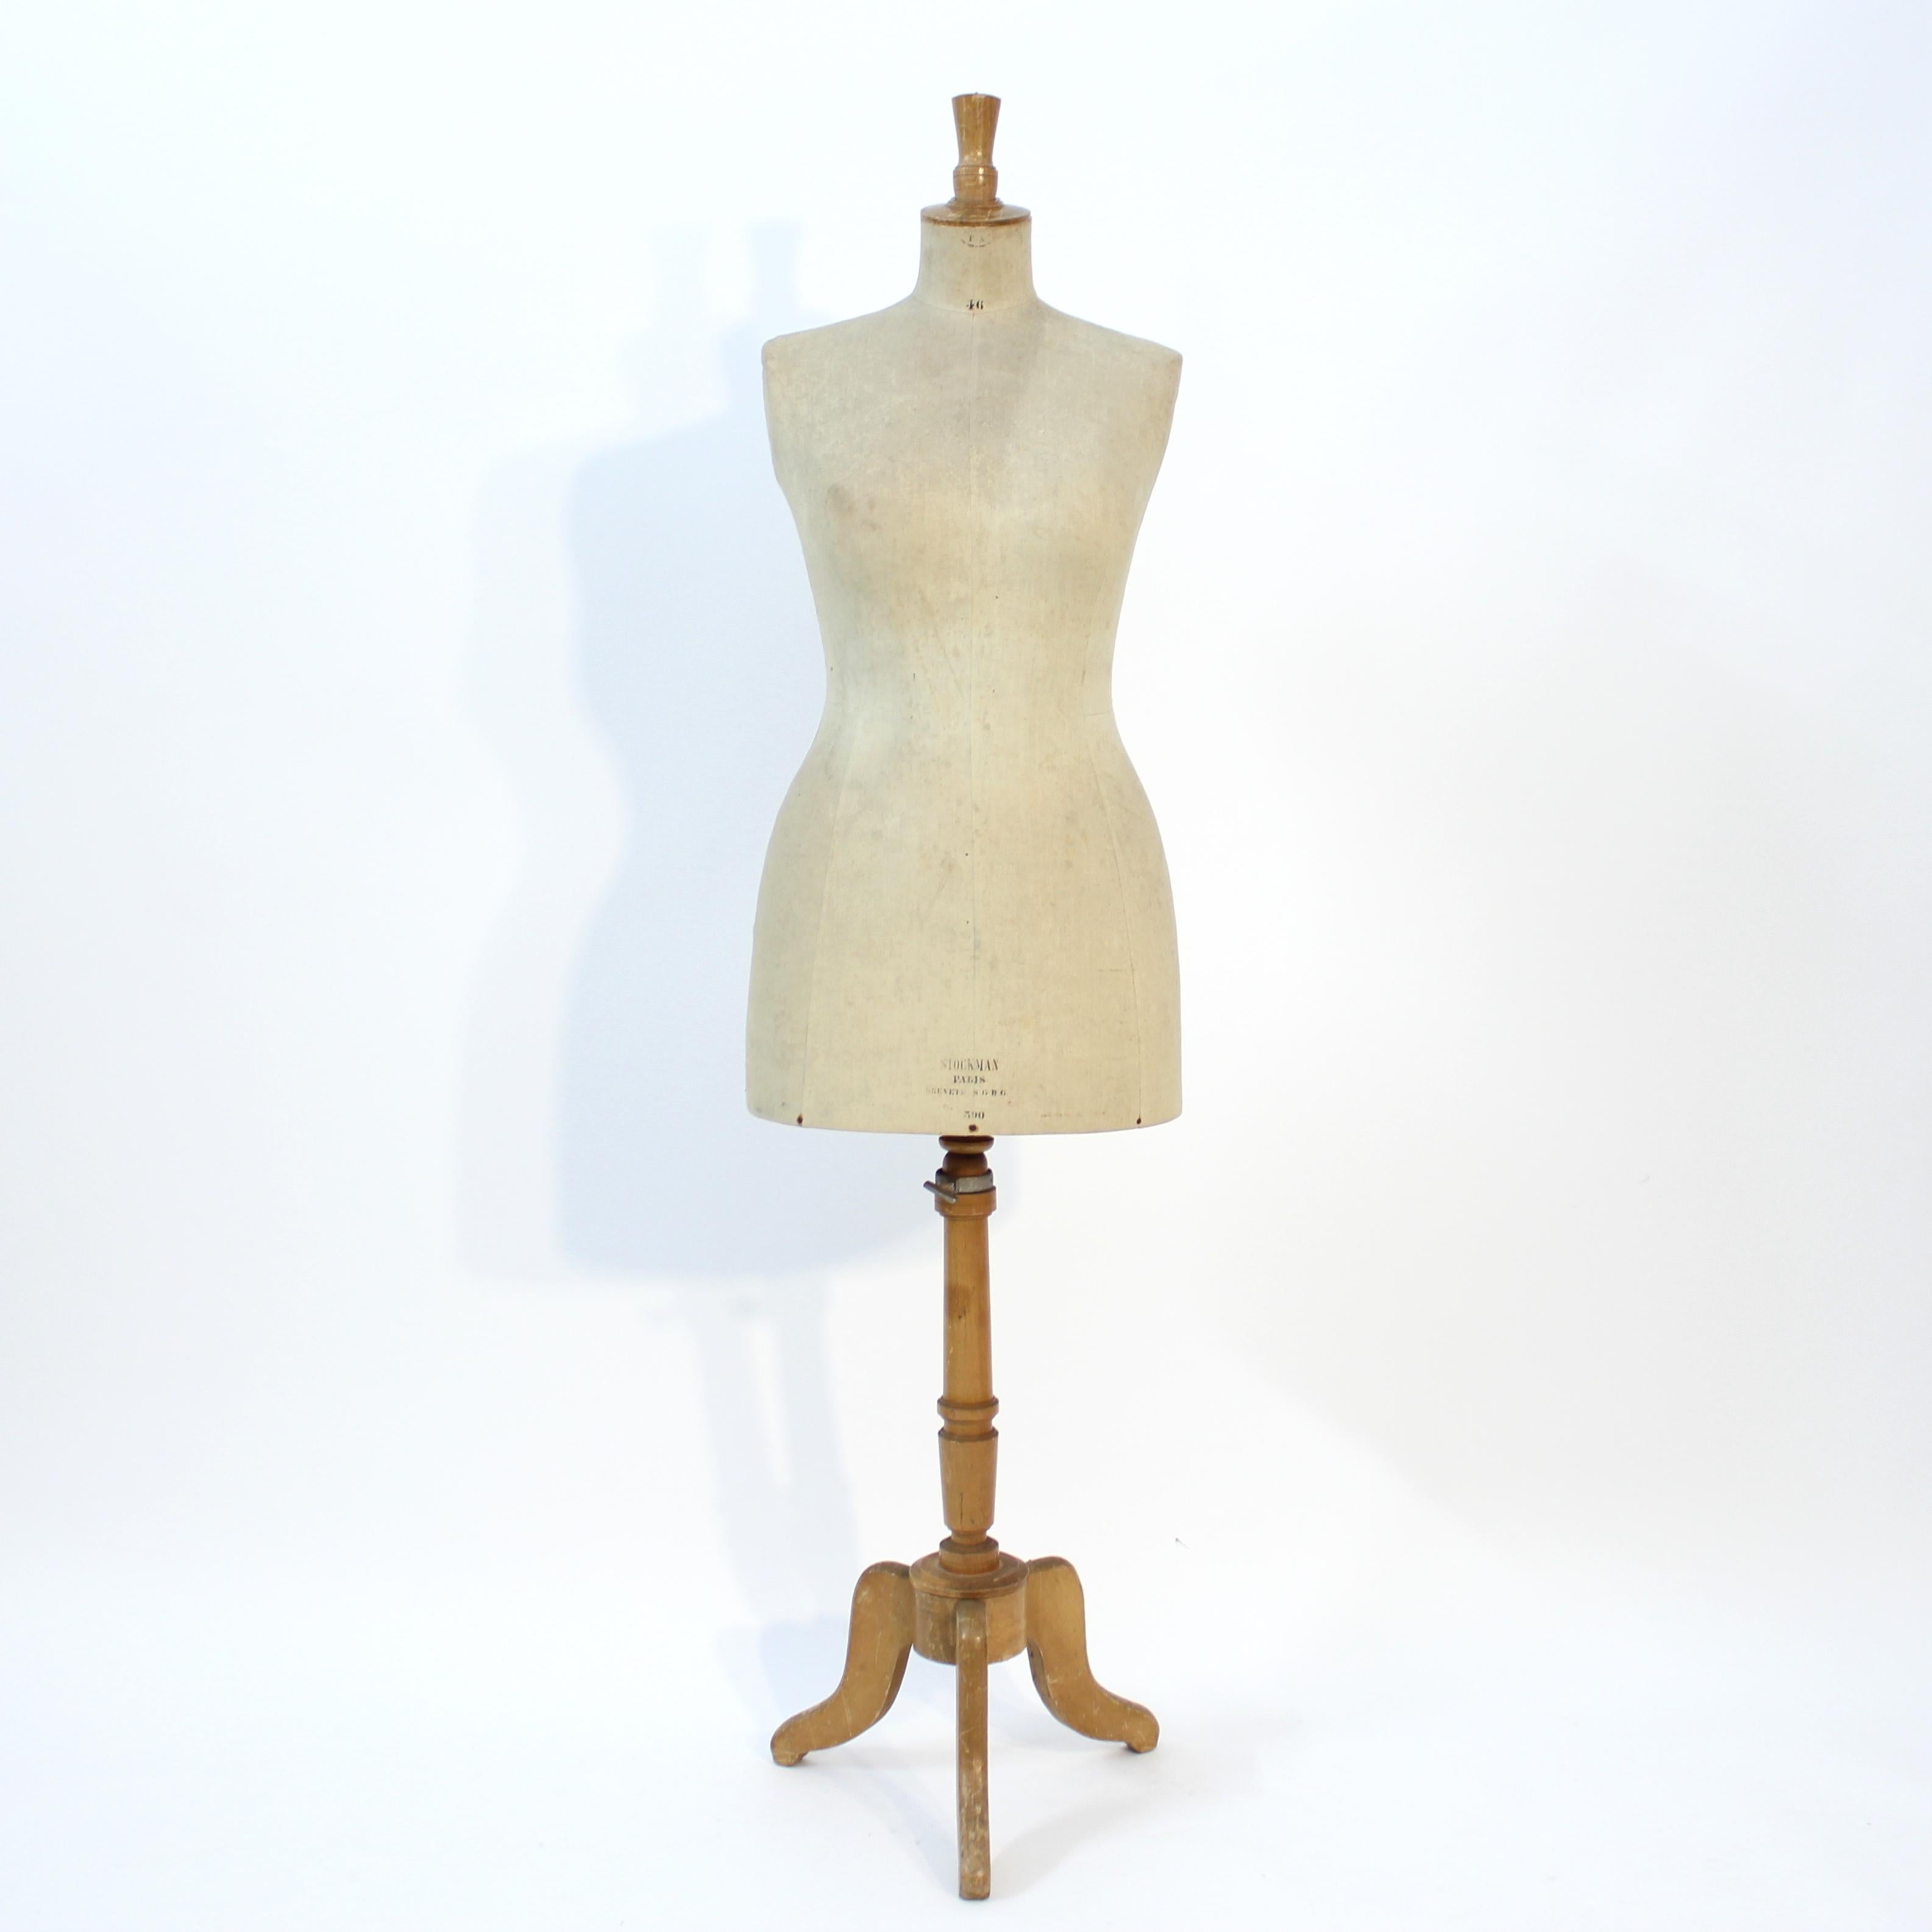 Very decorative female mid-century mannequin made by Siegel for Stockmann, Paris, size 46. The torso stands on a tripod wooden base of birch or beech. The whole construction is demountable. Good and honest condition with normal patina and ware 